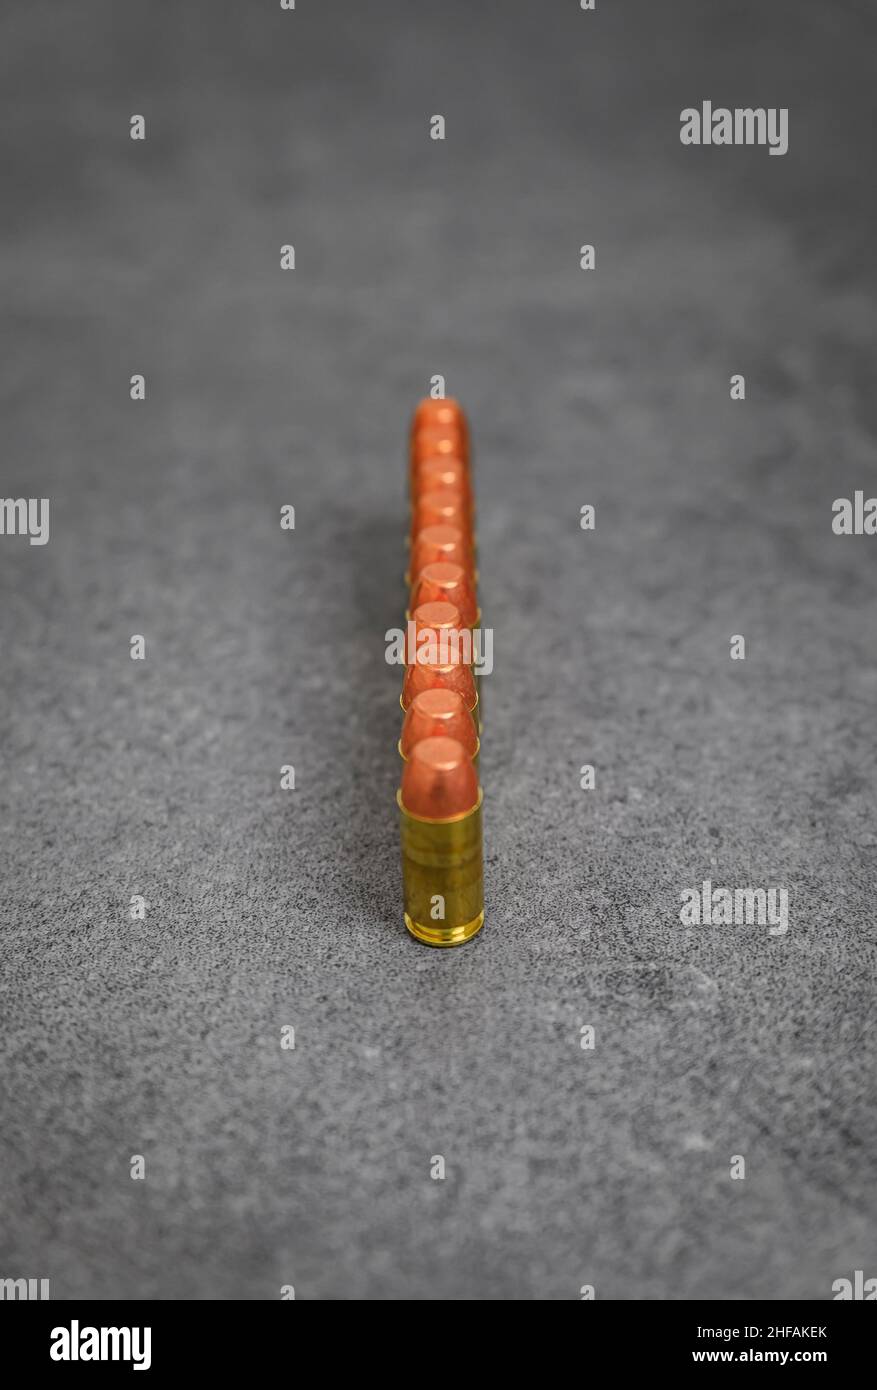 45 ACP caliber full metal jacket bullets unfired rounds lined up on a stone surface Stock Photo